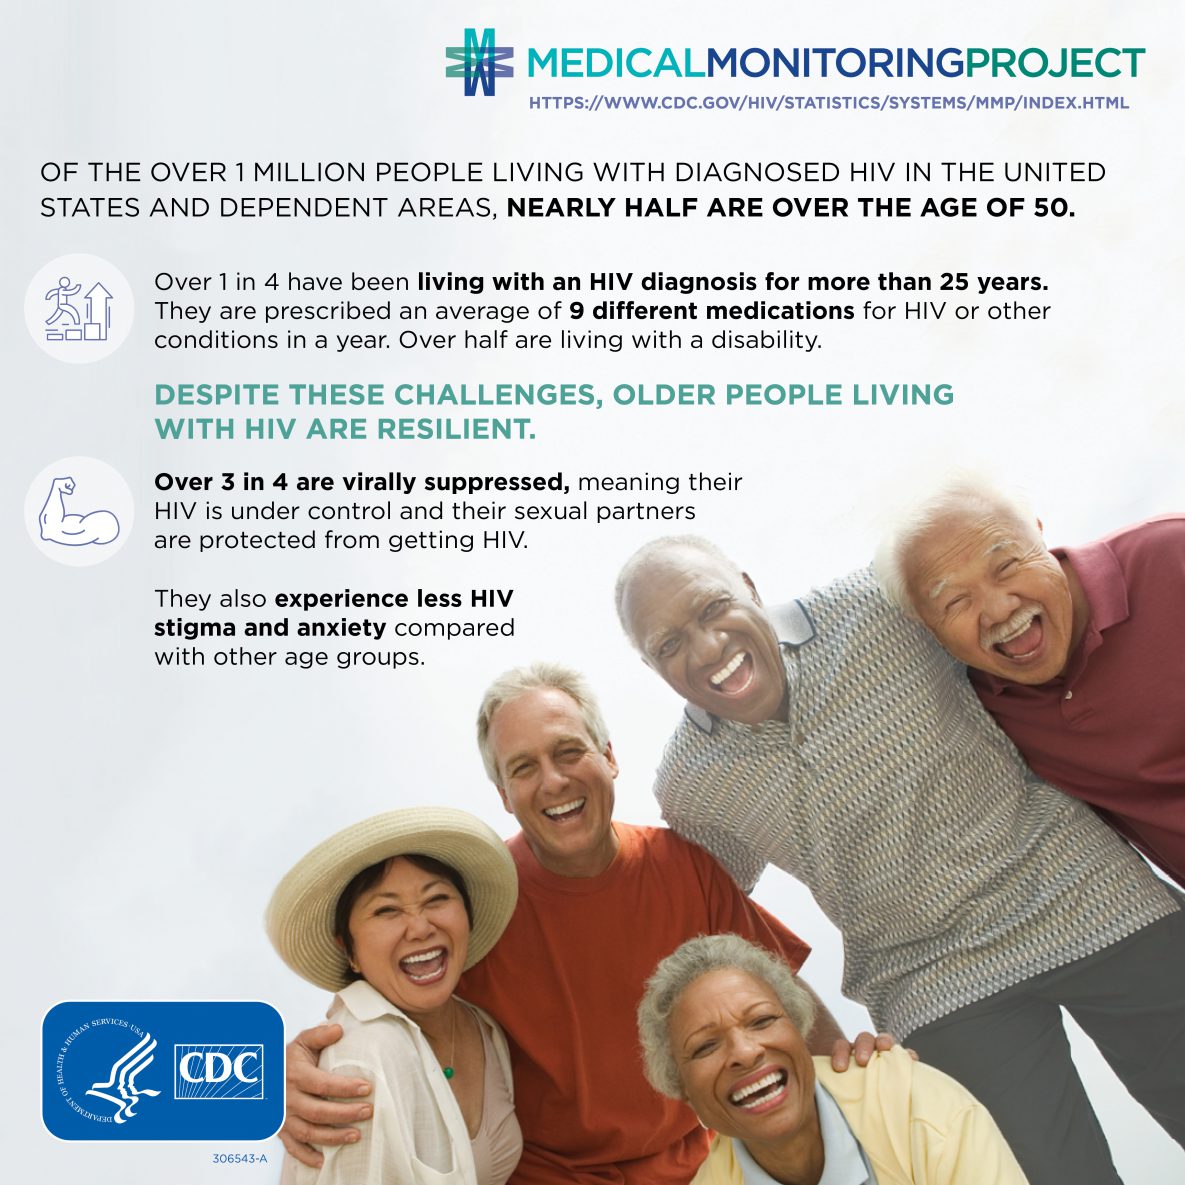 Of the over 1 million people living with diagnosed HIV in the United States and dependent areas, nearly half are over the age of 50. Over 1 in 4 have been living with an HIV diagnosis for more than 25 years. They are prescribed an average of 9 different medications for HIV or other conditions in a year. Over half are living with a disability. Despite these challenges, older people living with HIV are resilient. Over 3 in 4 are virally suppressed, meaning their HIV is under control and their sexual partners are protected from getting HIV. They also experience less HIV stigma and anxiety compared with other age groups.